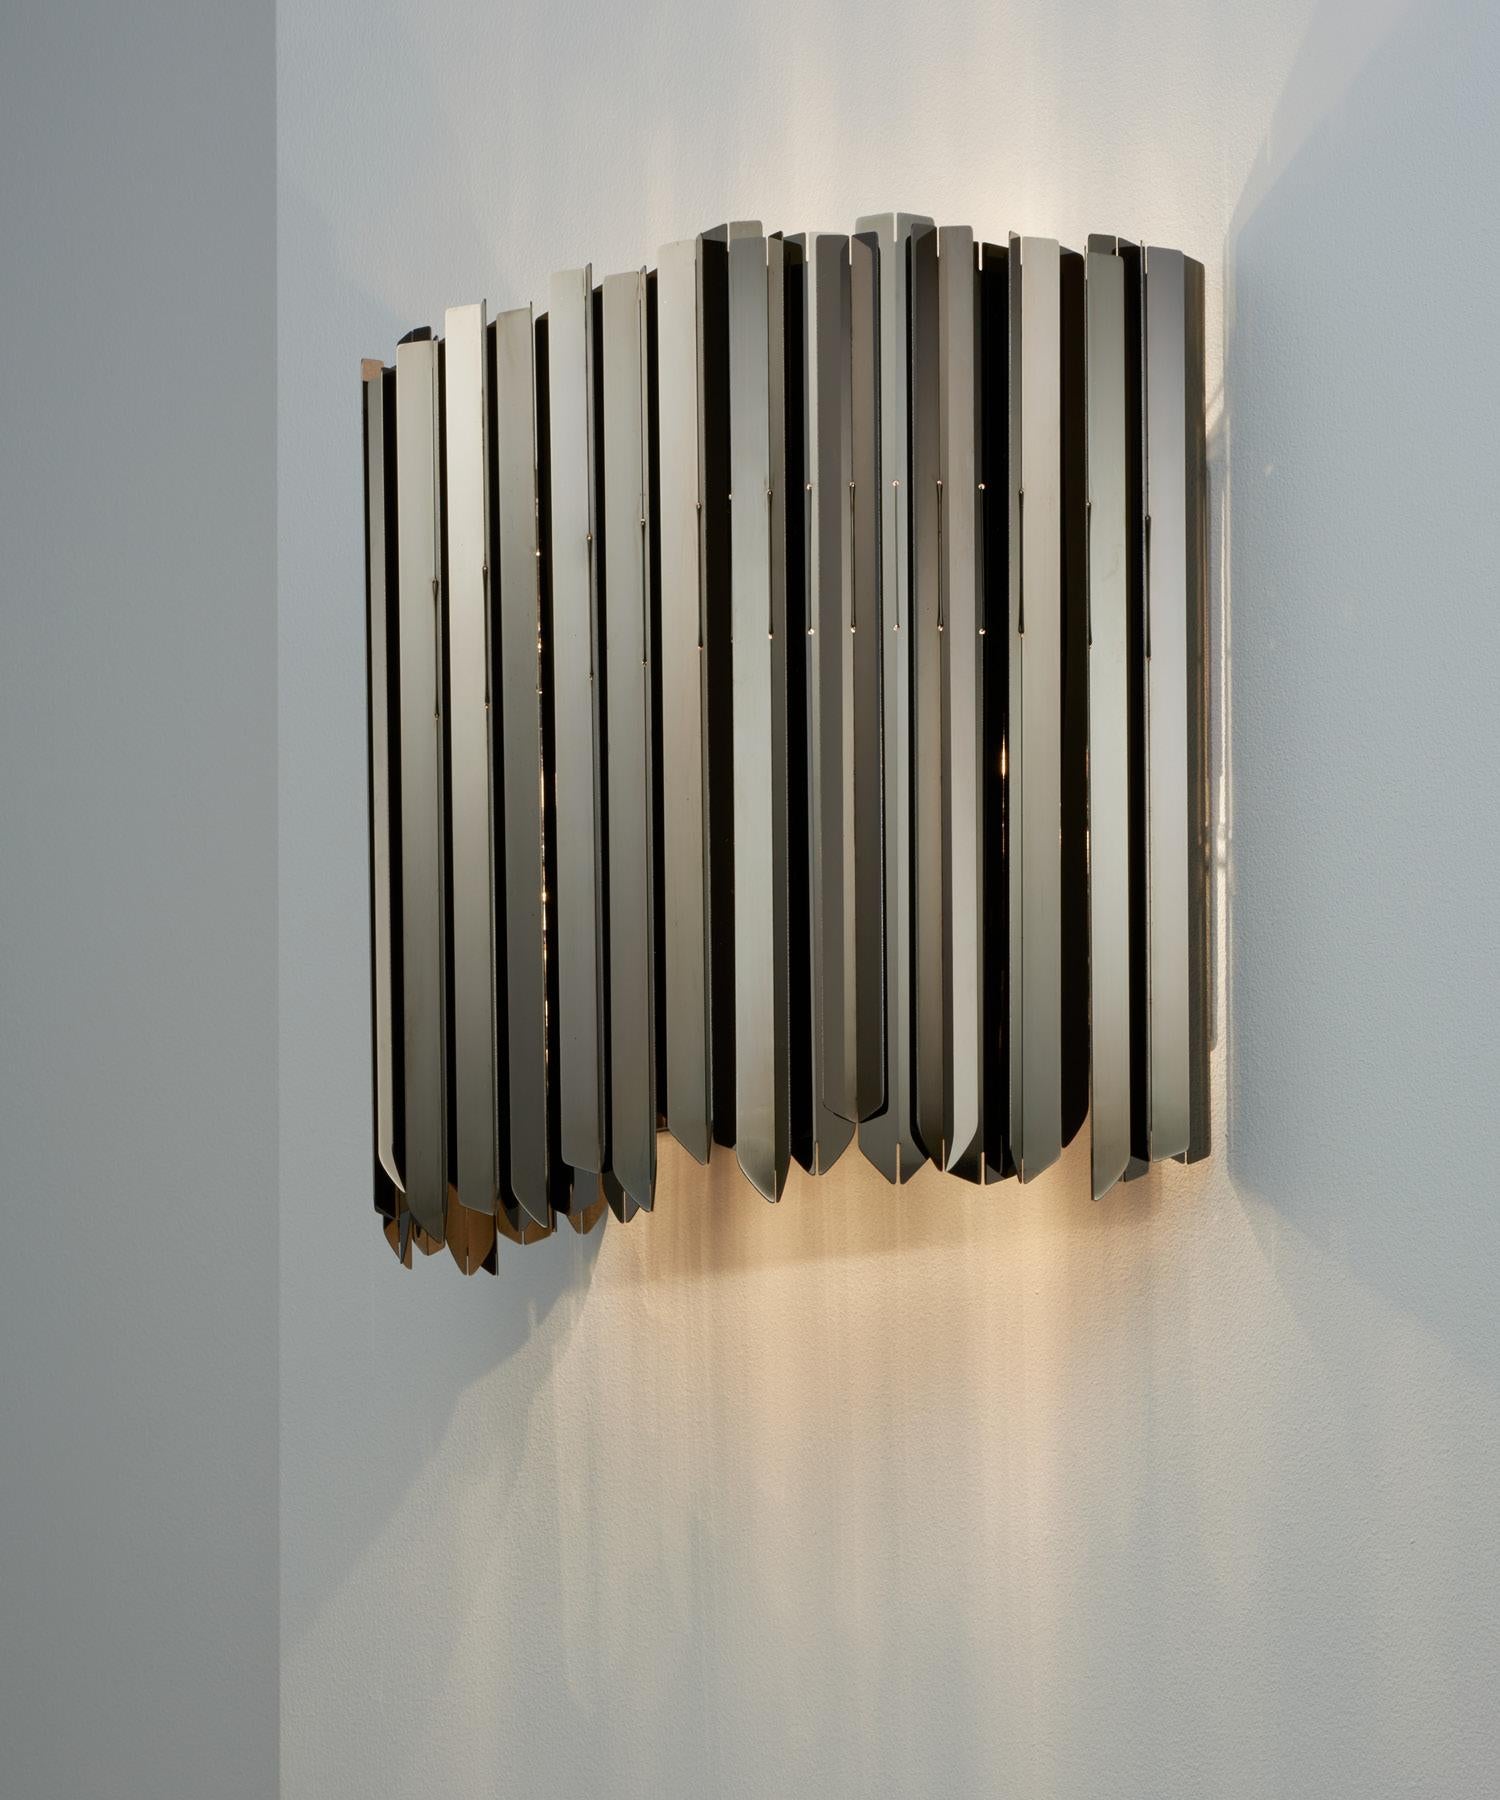 In keeping with the rest of our range, the Facet Wall Light is a unique design. Providing both up and down light, it creates a special ambience- adding a distinct richness to your interior. The luxurious metal finish is available in polished